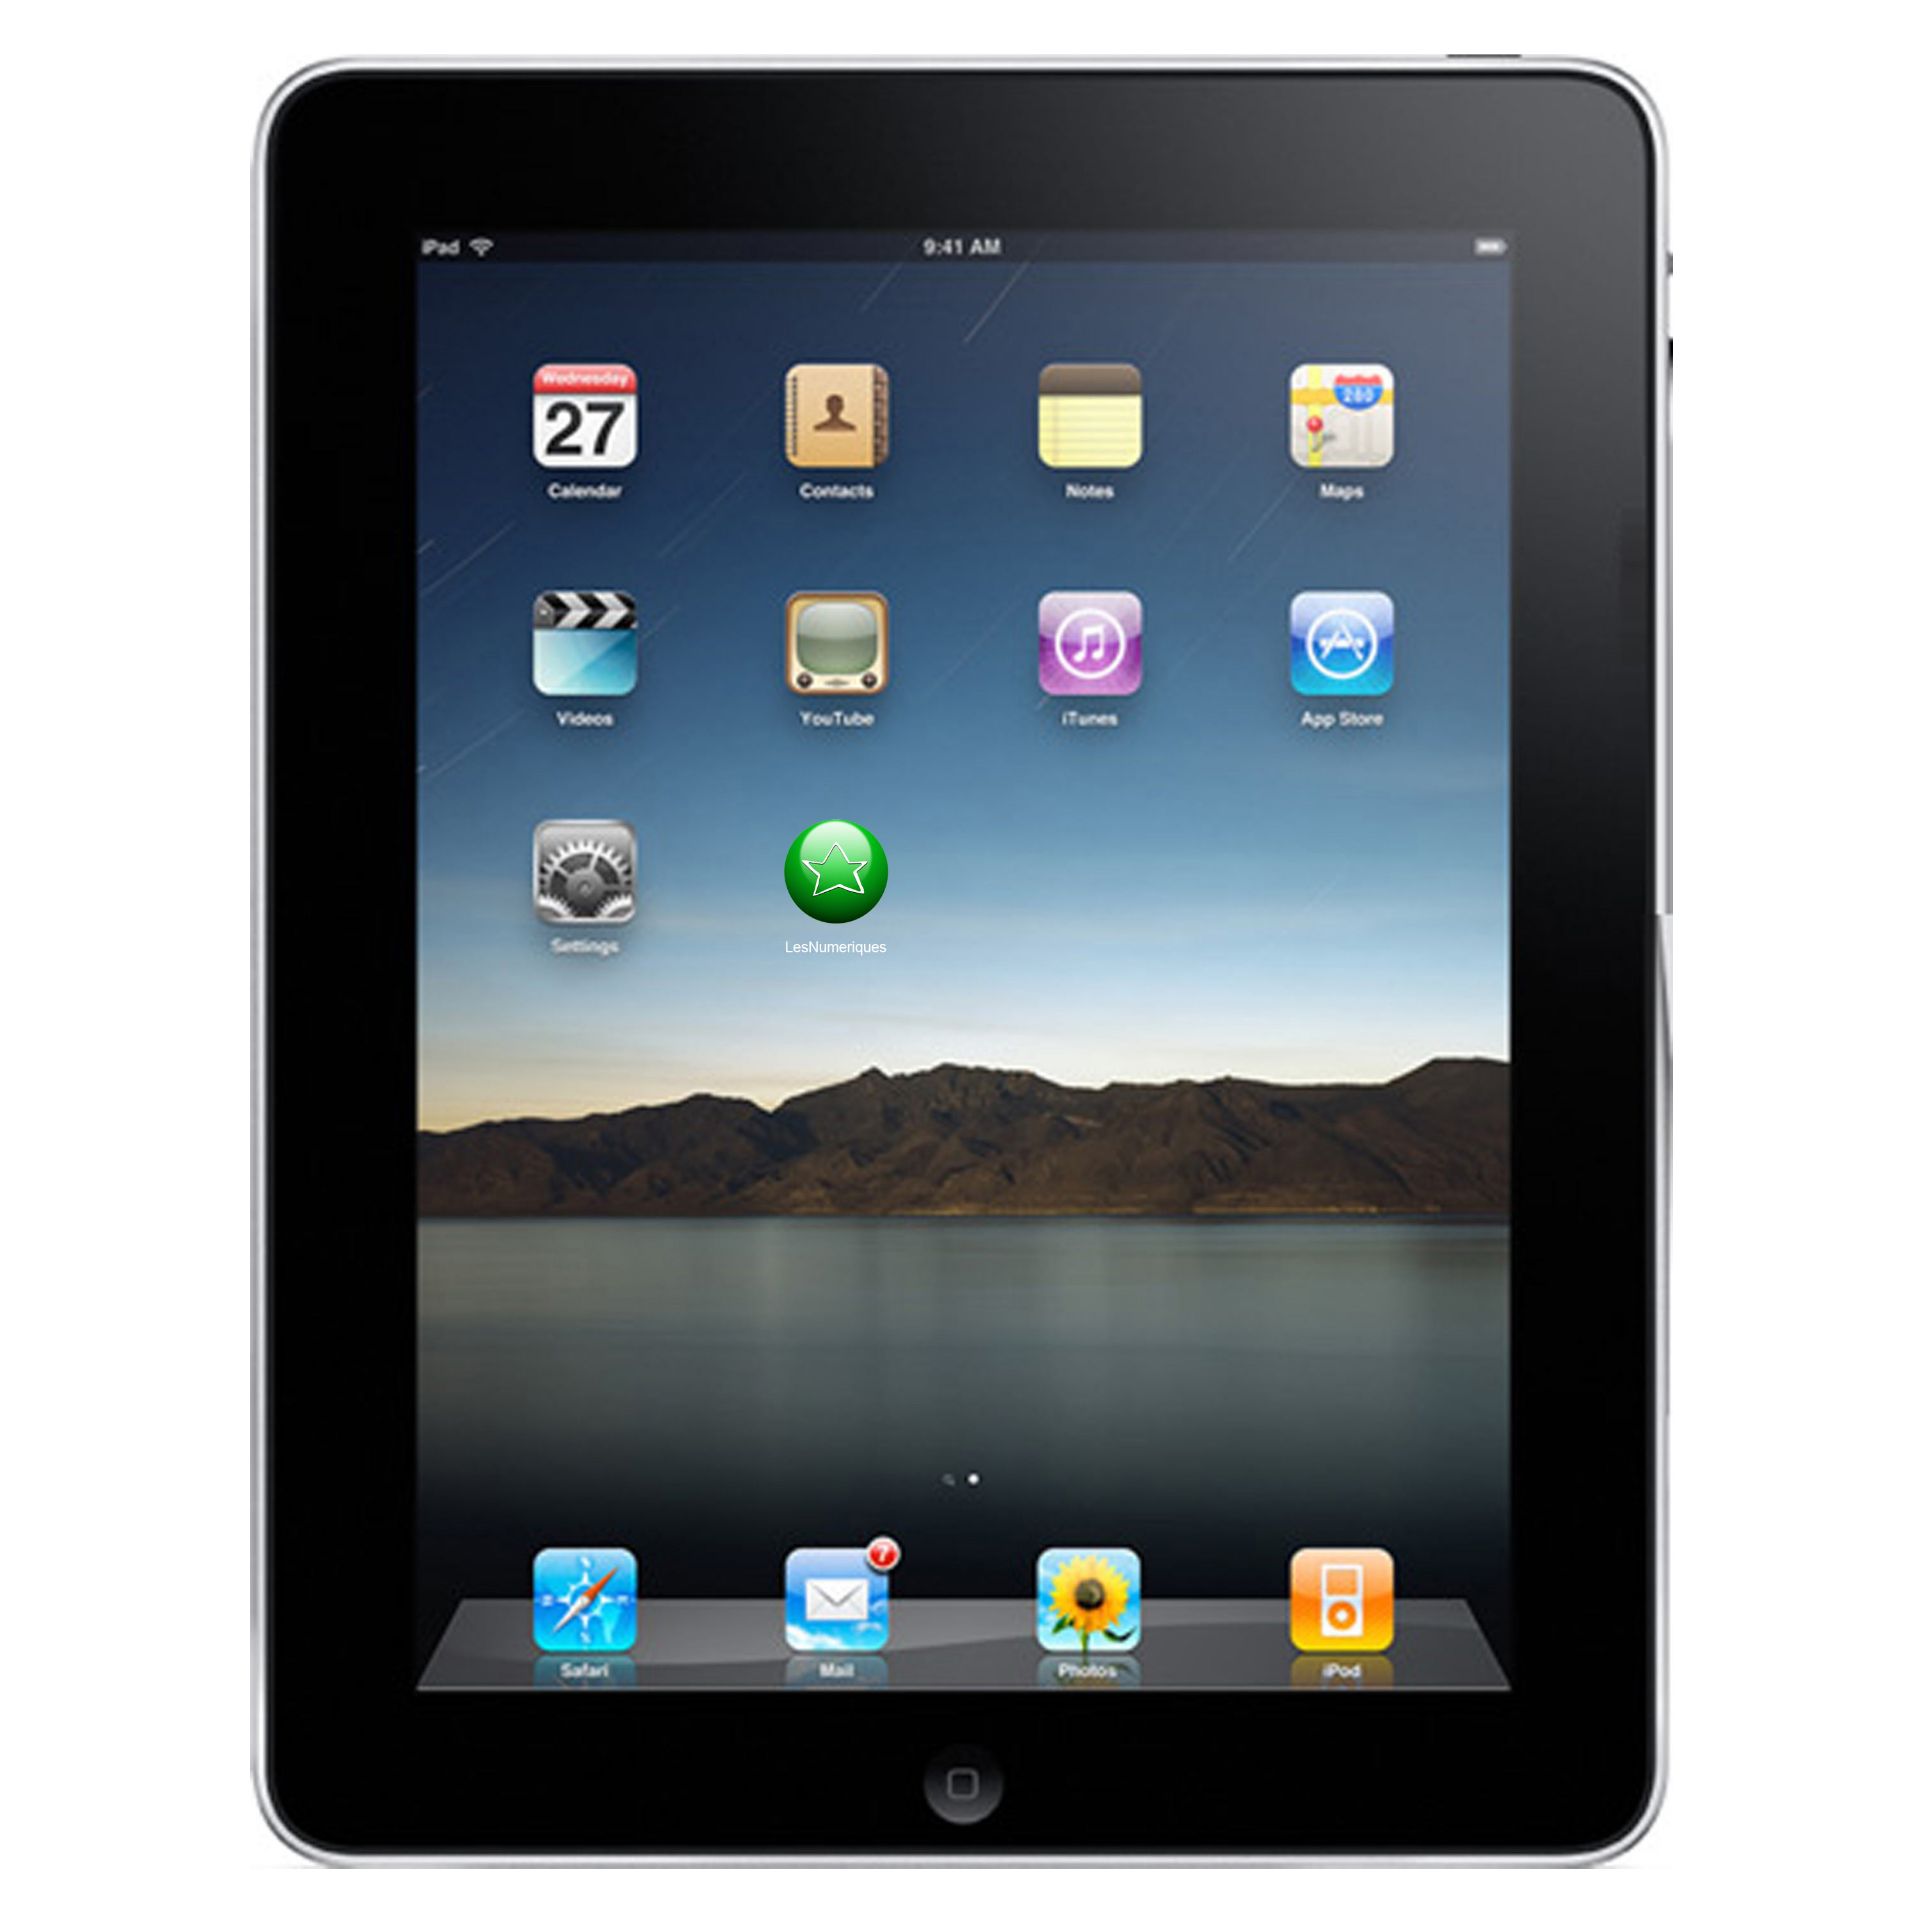 V  Grade A iPad 4 16Gb Black With Two Cameras/Retina Display With Charger In Original Box -